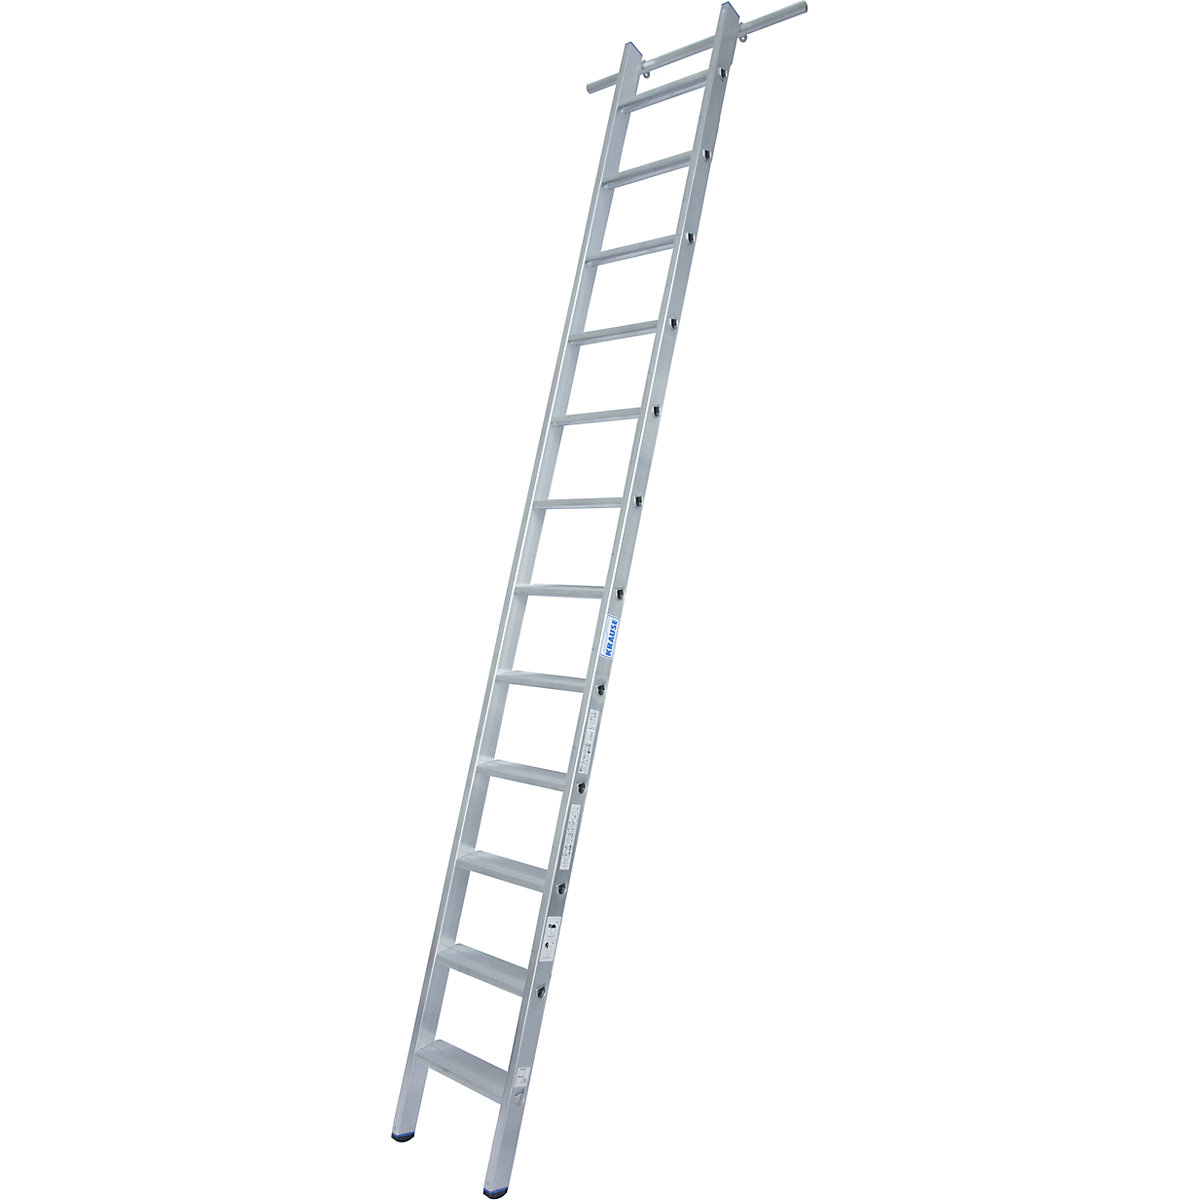 Step shelf ladder – KRAUSE, suspendable, with 1 pair of hooks, 12 steps-3